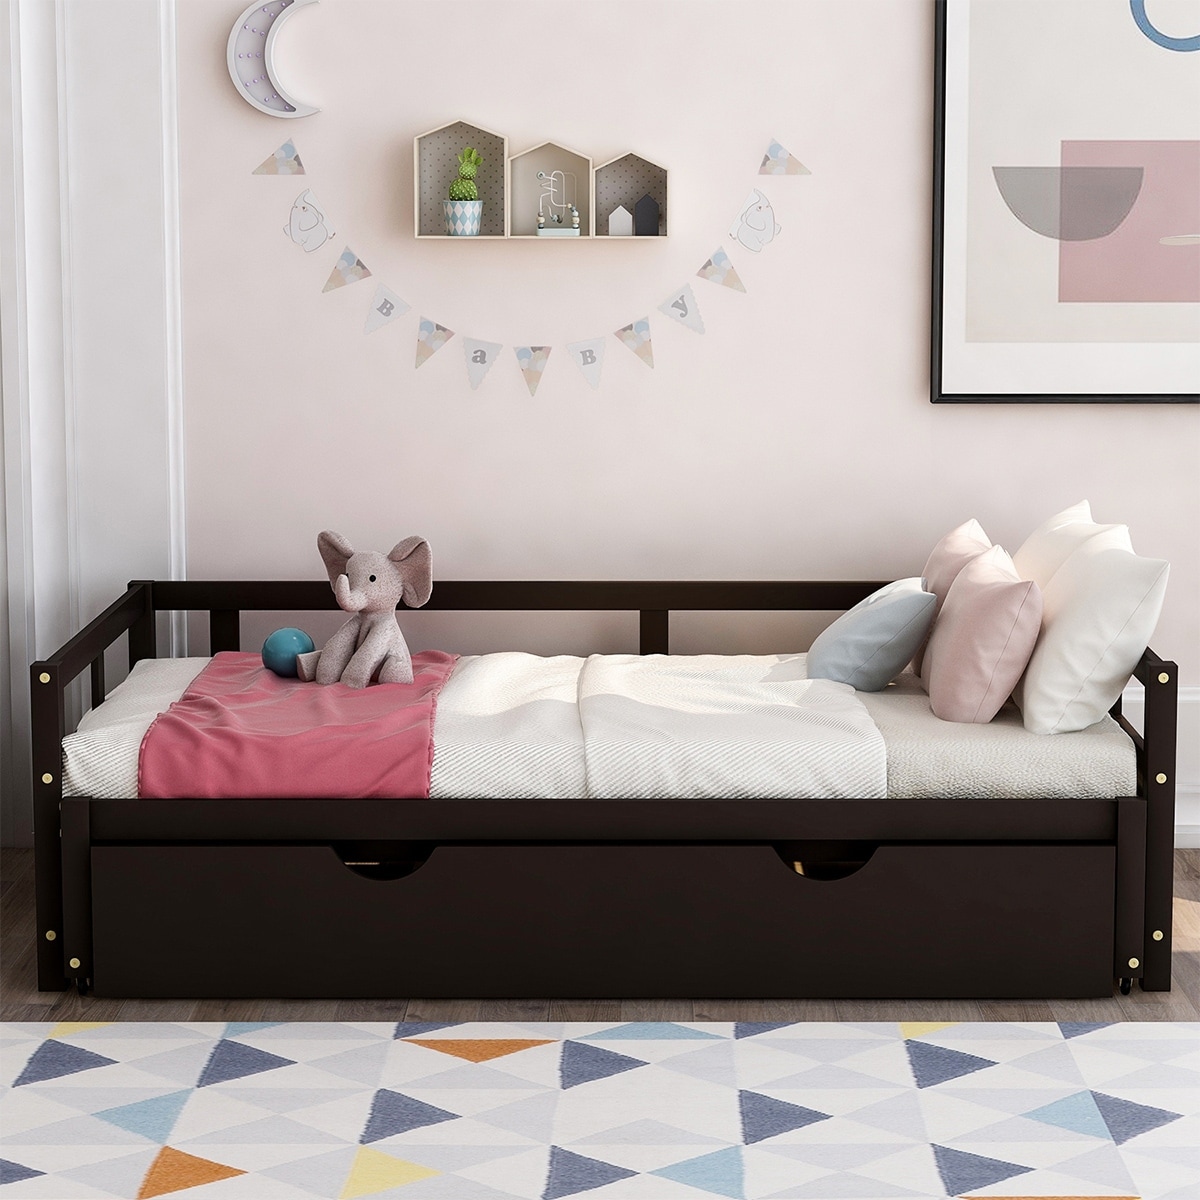 https://ak1.ostkcdn.com/images/products/is/images/direct/c20988f861d561dd6f99675588ffb306544bb011/Merax-Twin-King-Expandable-Sleeper-Daybed-with-Trundle.jpg